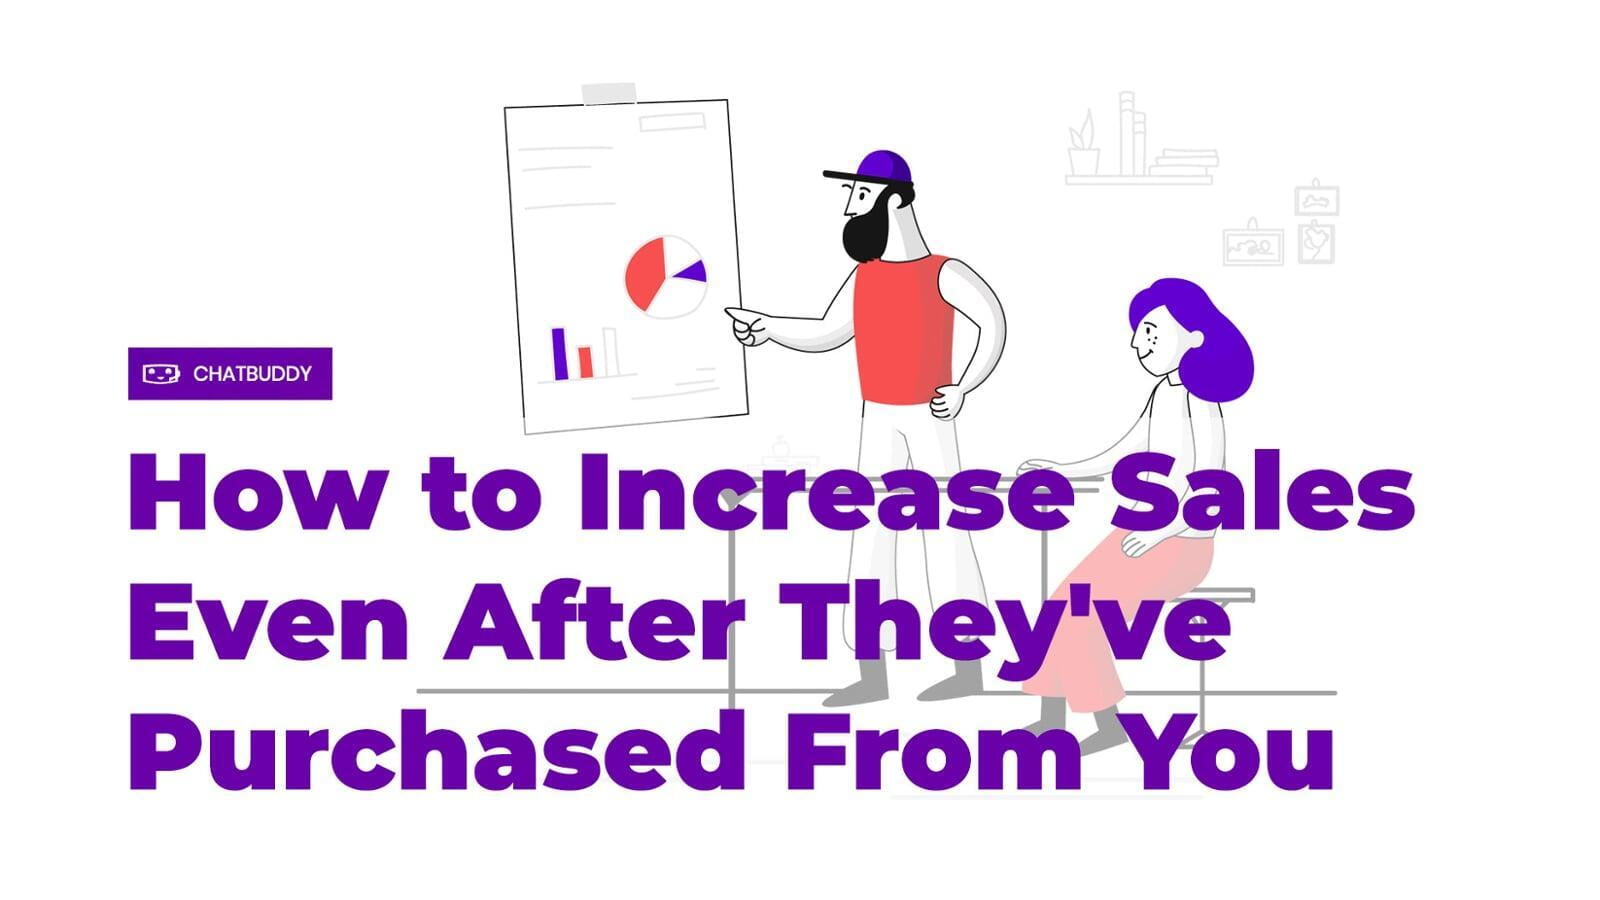 How to Increase Sales Even After They've Purchased From You